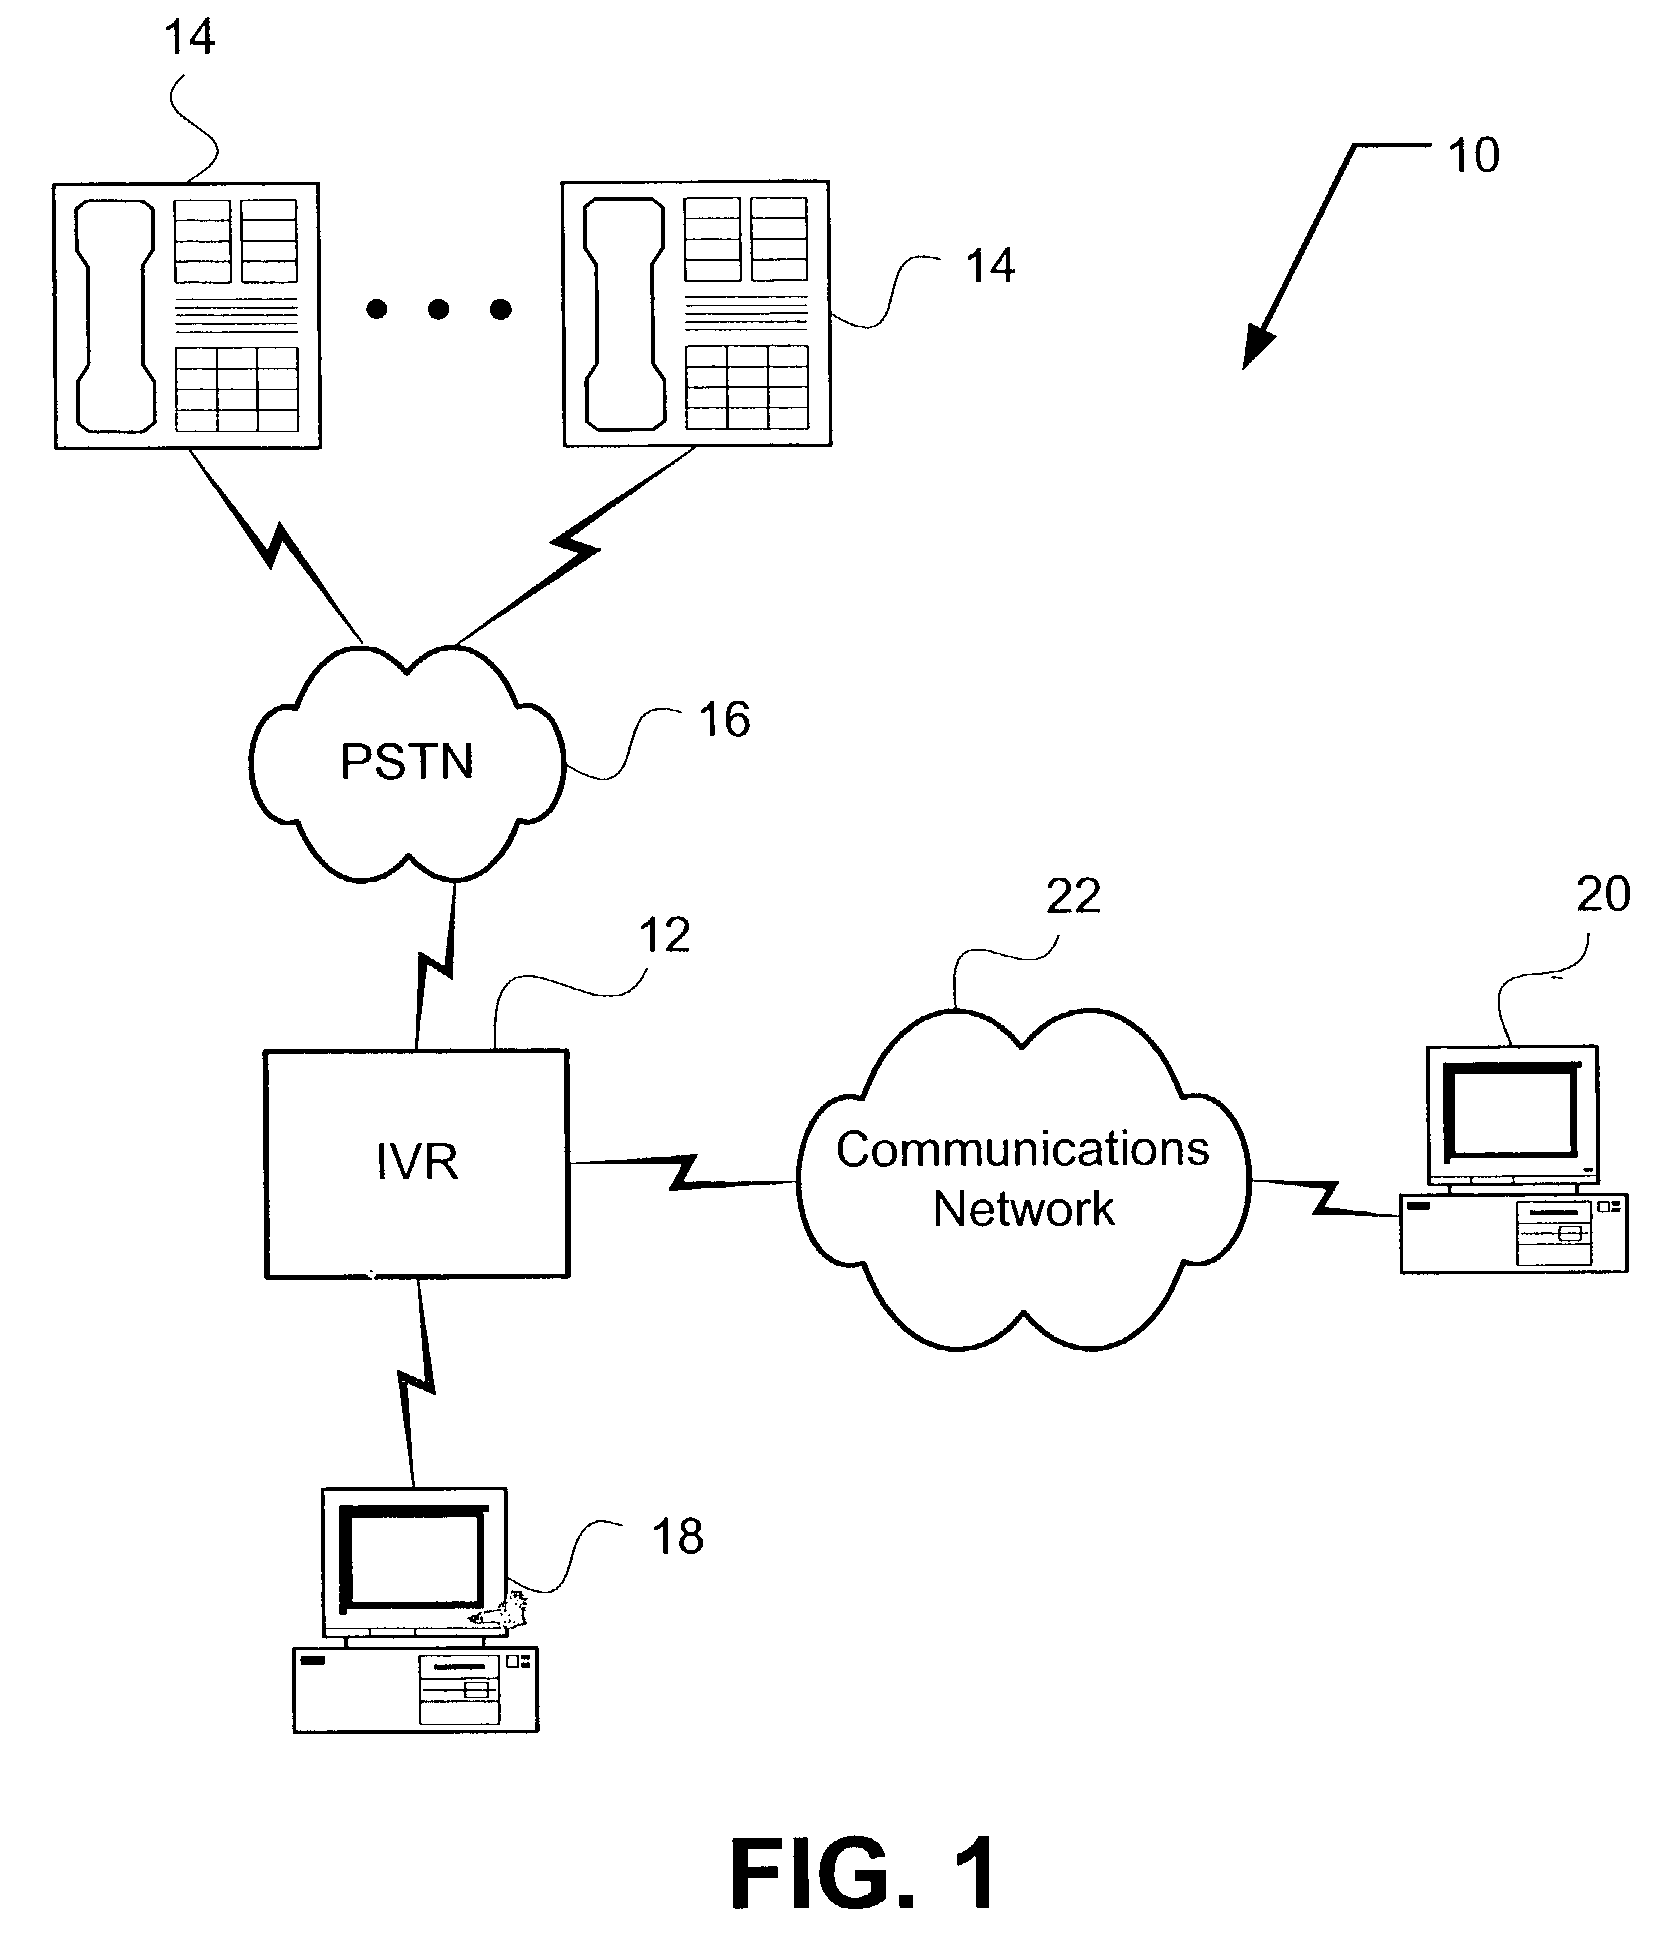 Menu-based, speech actuated system with speak-ahead capability